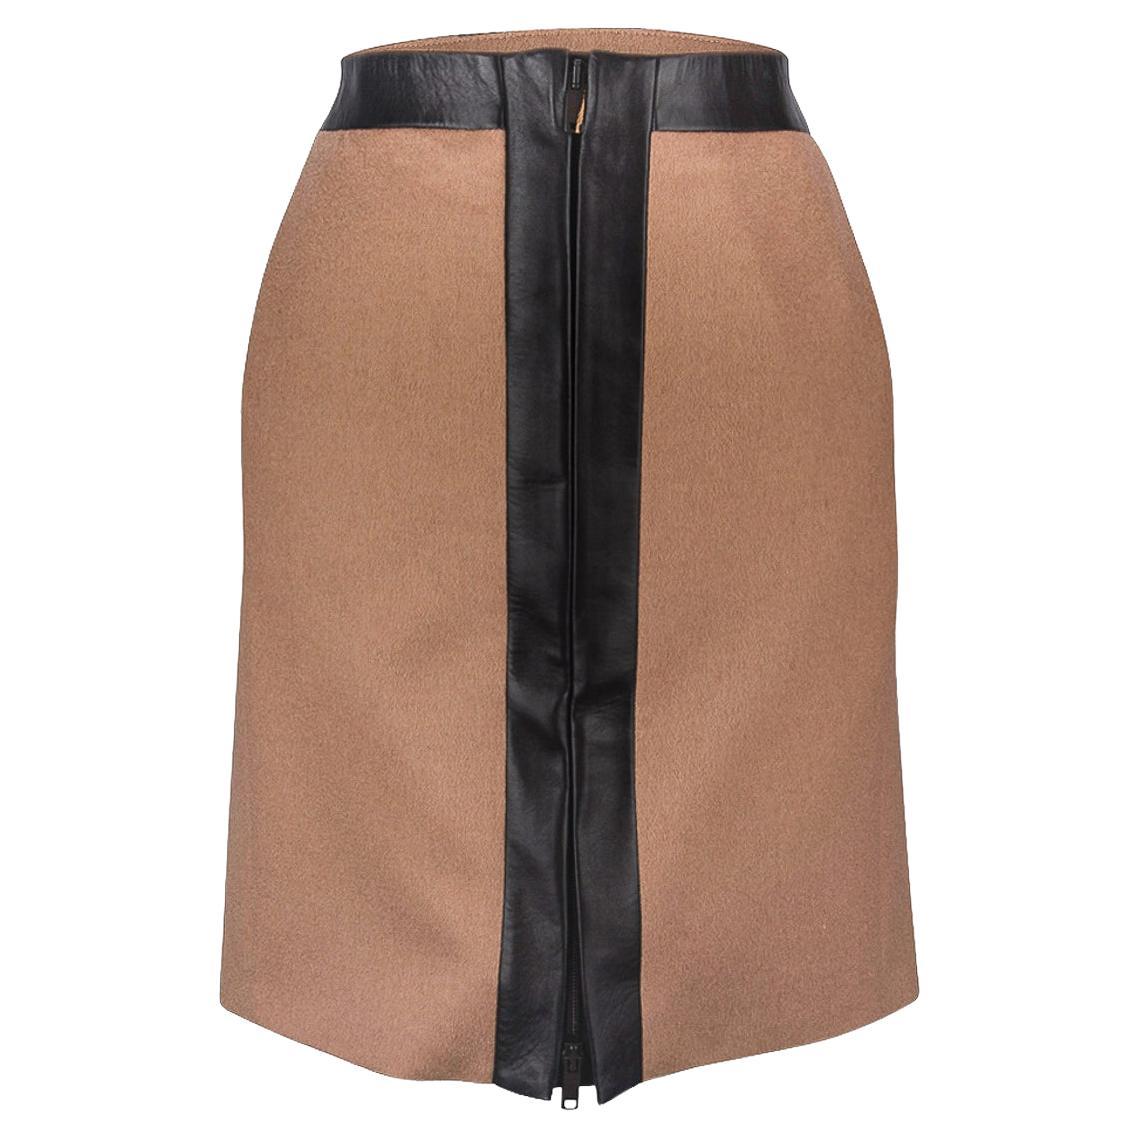 Gucci Skirt Camel Hair Leather Trim Front Zipper 40 /  6 Nwt For Sale